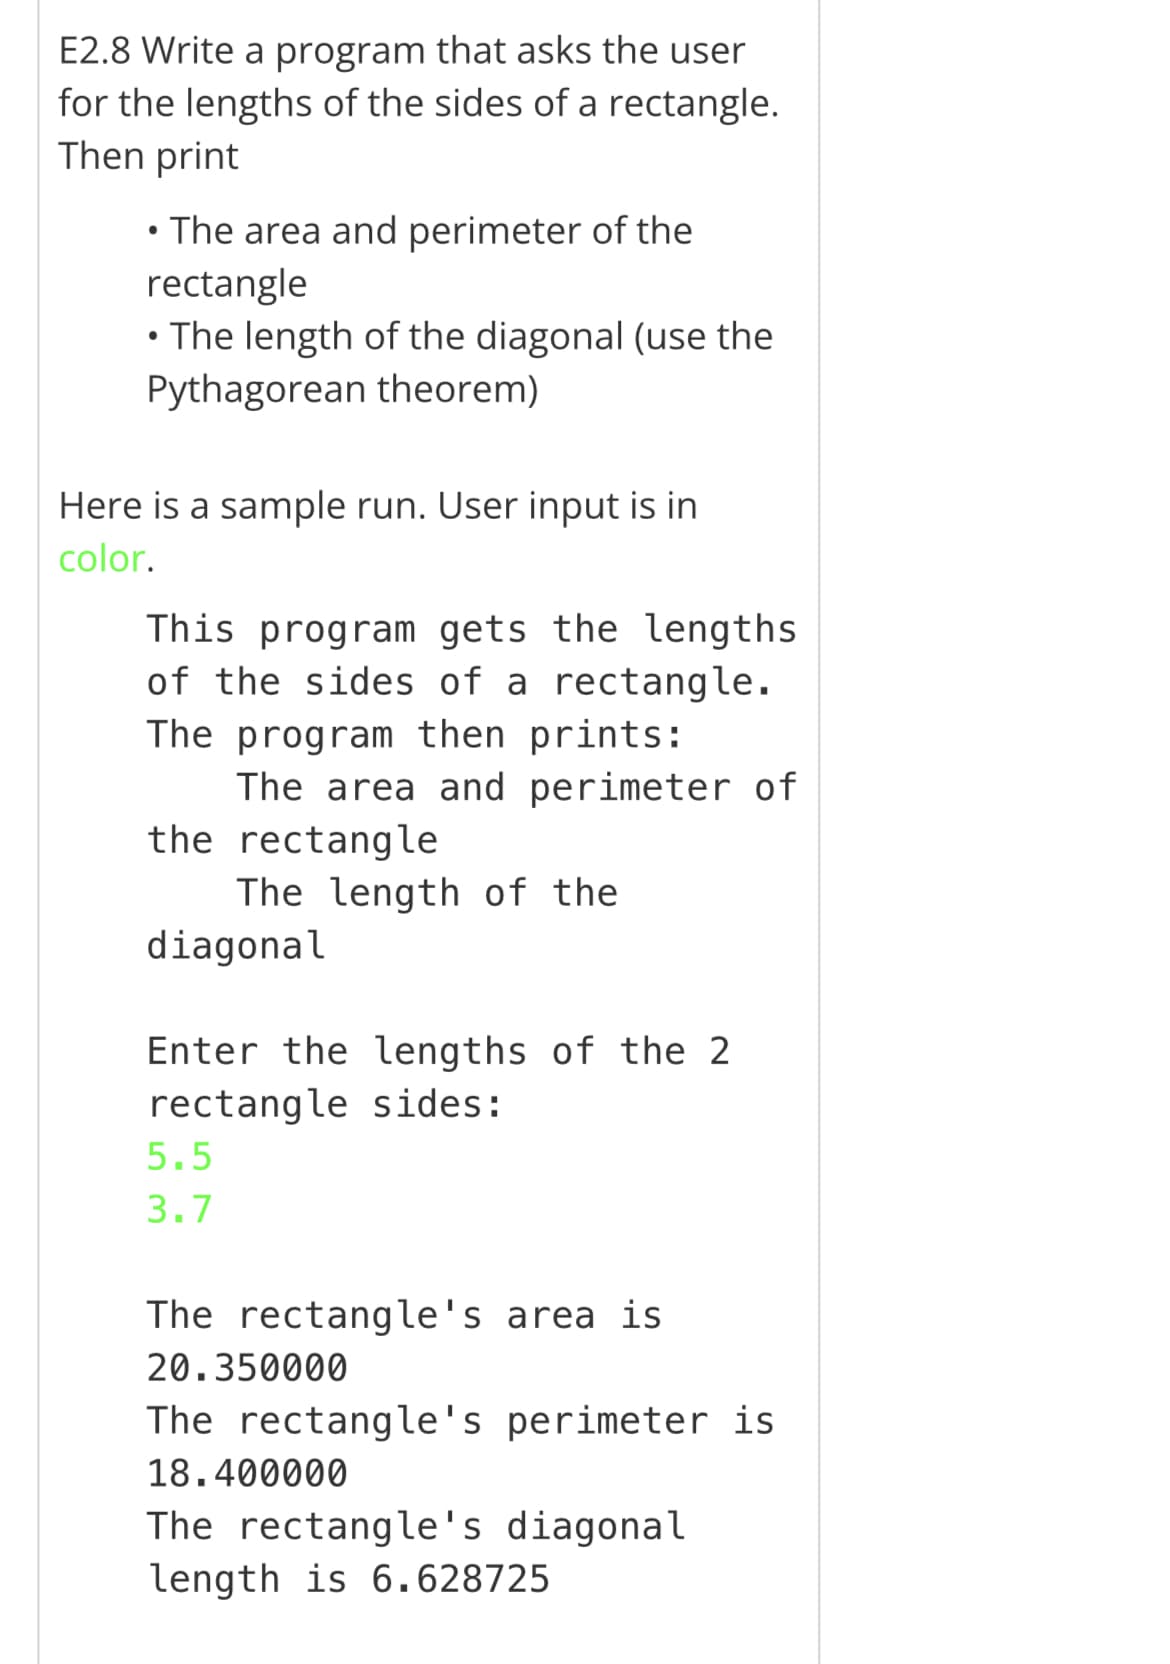 E2.8 Write a program that asks the user
for the lengths of the sides of a rectangle.
Then print
• The area and perimeter of the
rectangle
• The length of the diagonal (use the
Pythagorean theorem)
Here is a sample run. User input is in
color.
This program gets the lengths
of the sides of a rectangle.
The program then prints:
The area and perimeter of
the rectangle
The length of the
diagonal
Enter the lengths of the 2
rectangle sides:
5.5
3.7
The rectangle's area is
20.350000
The rectangle's perimeter is
18.400000
The rectangle's diagonal
length is 6.628725